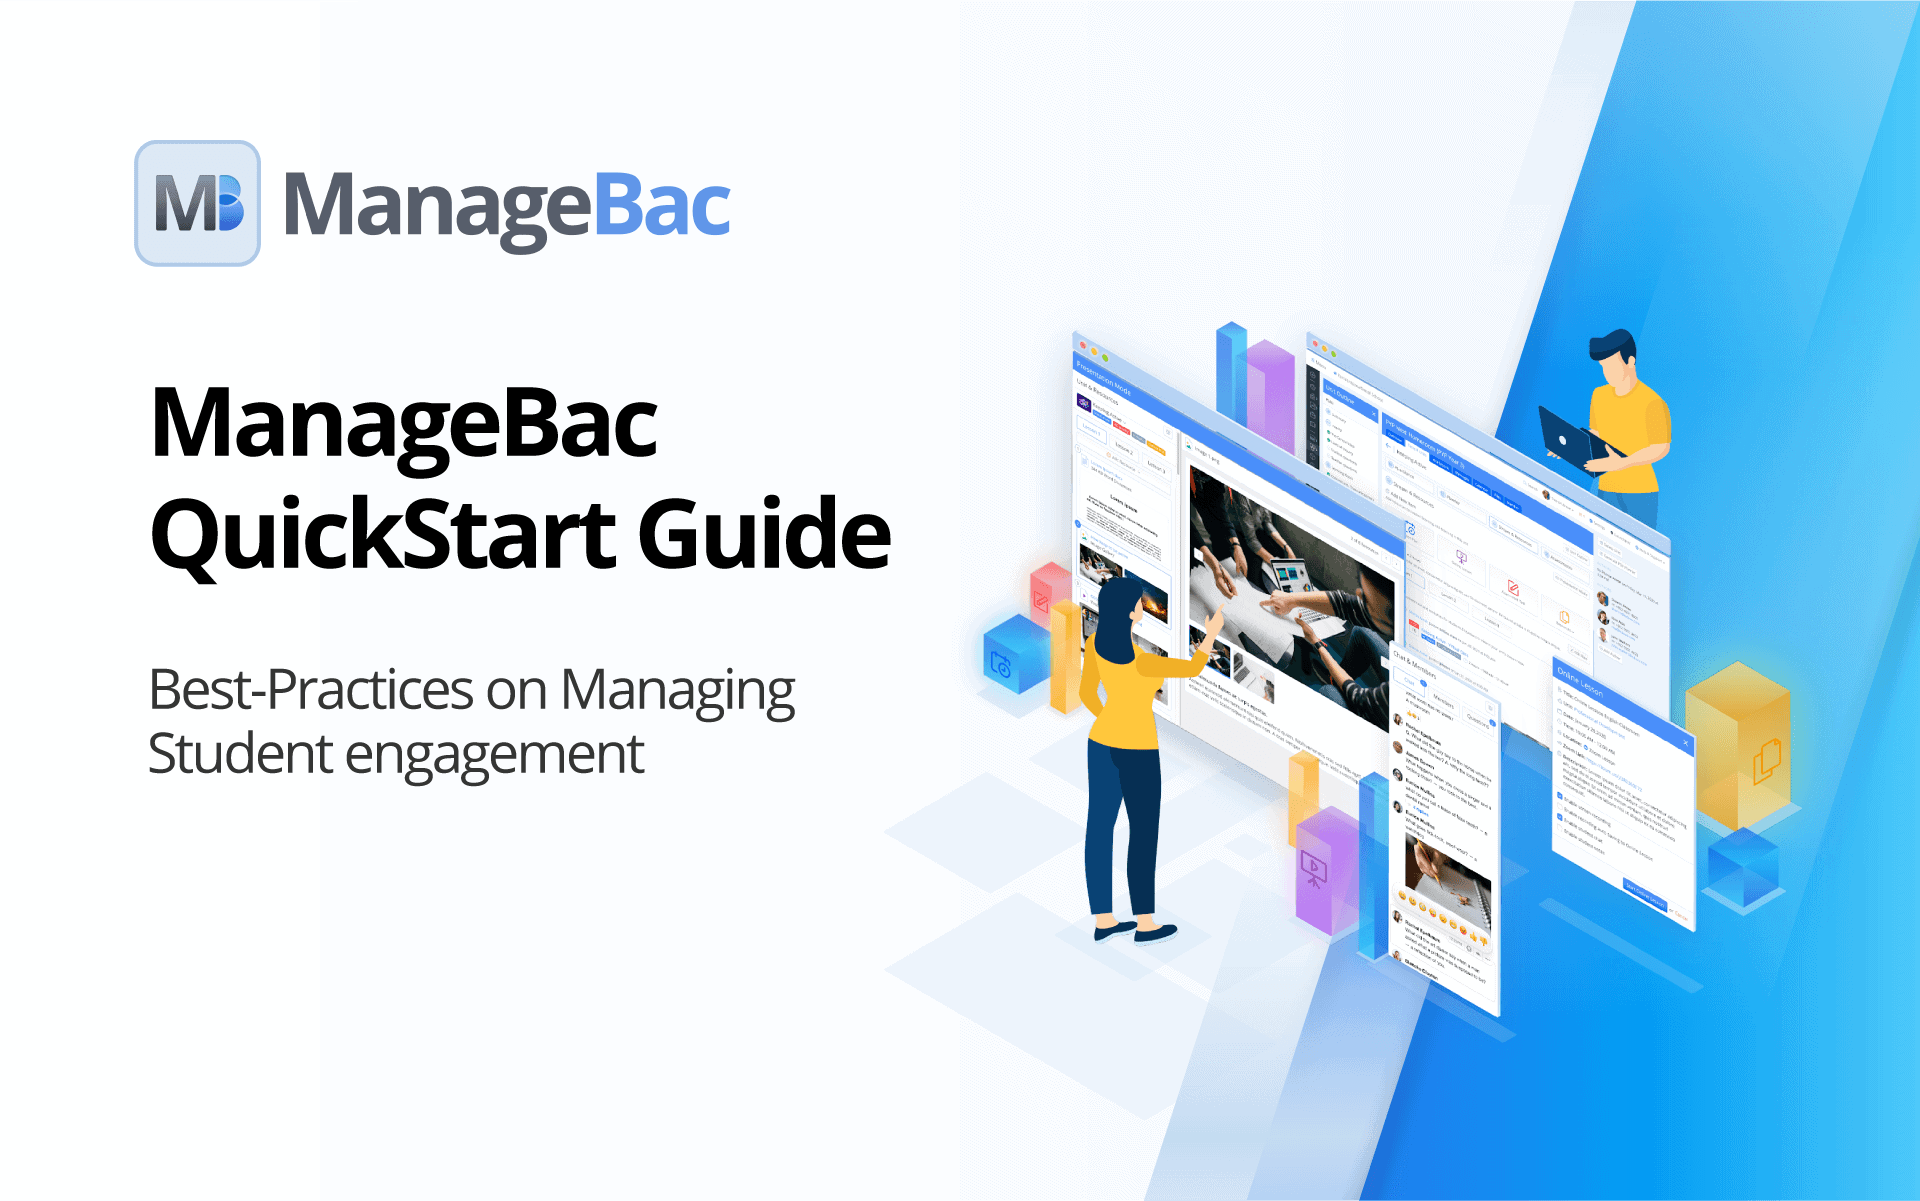 ManageBac QuickStart Guide: Best-Practices on Managing Student Engagement